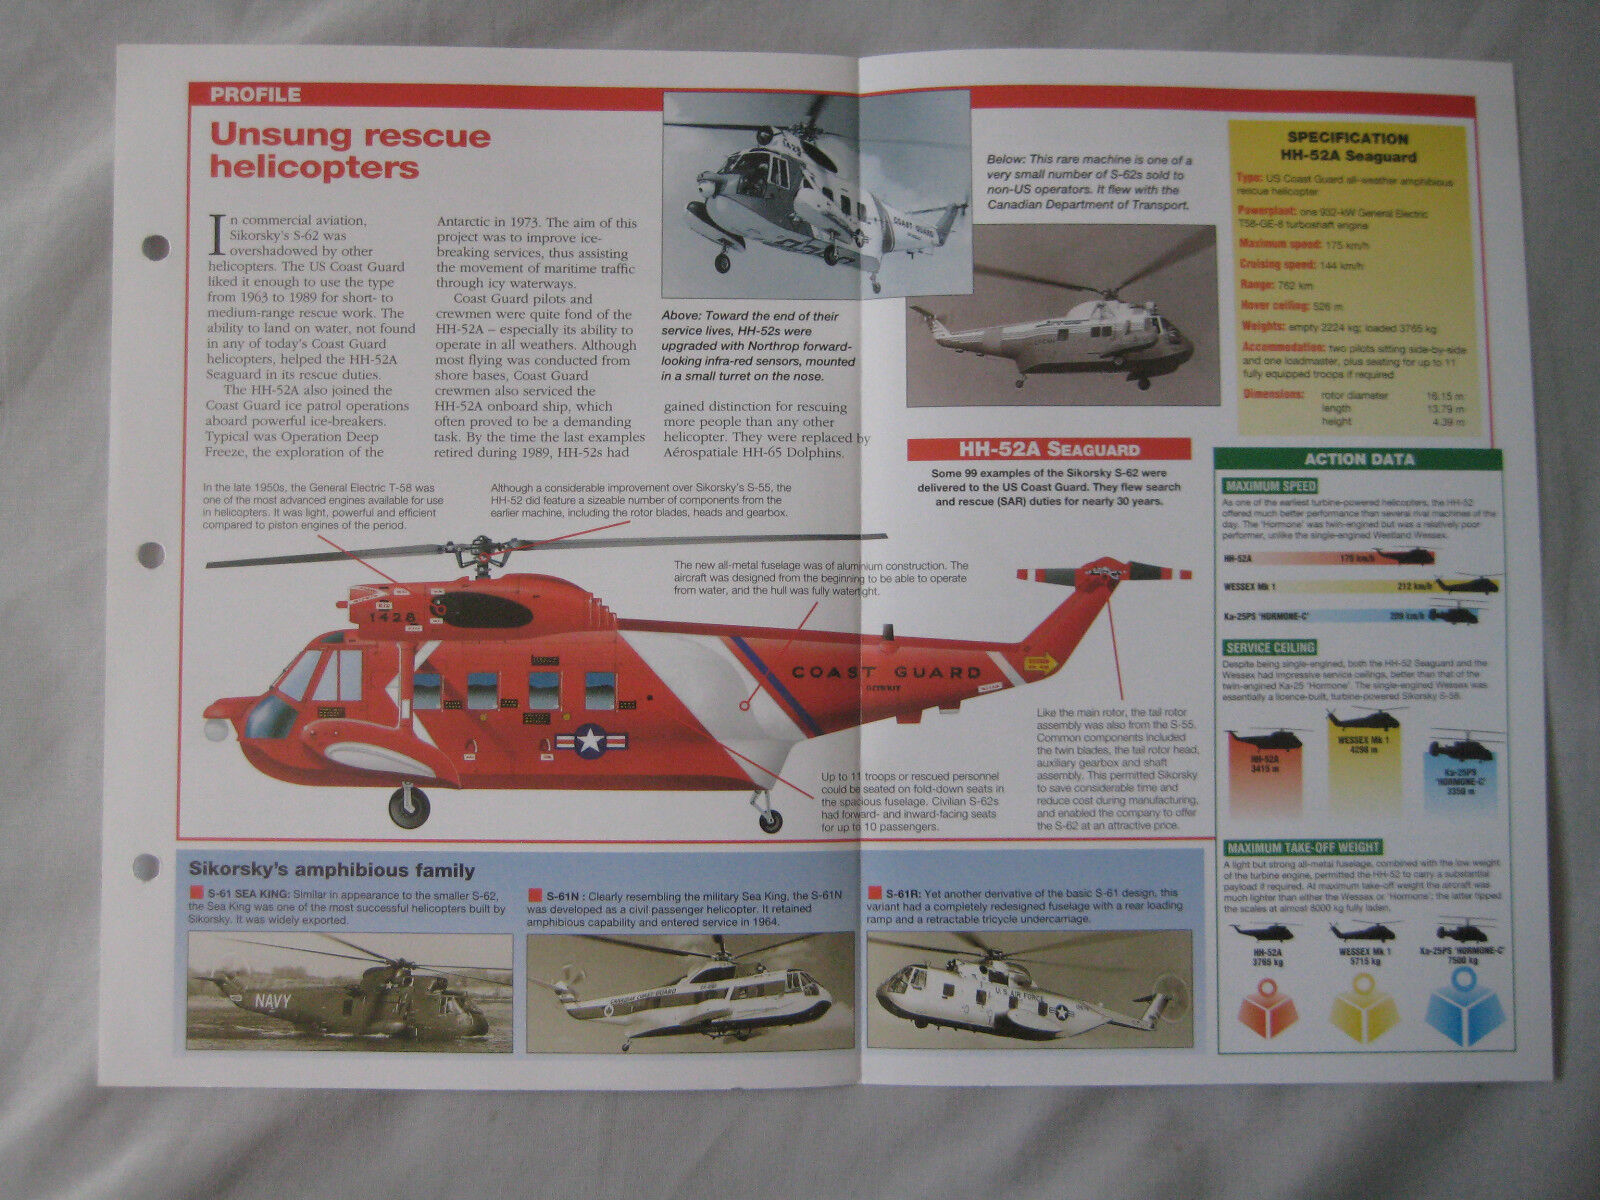 Aircraft of the World Card 78 , Group 3 - Sikorsky S-62/HH-52 Seaguard